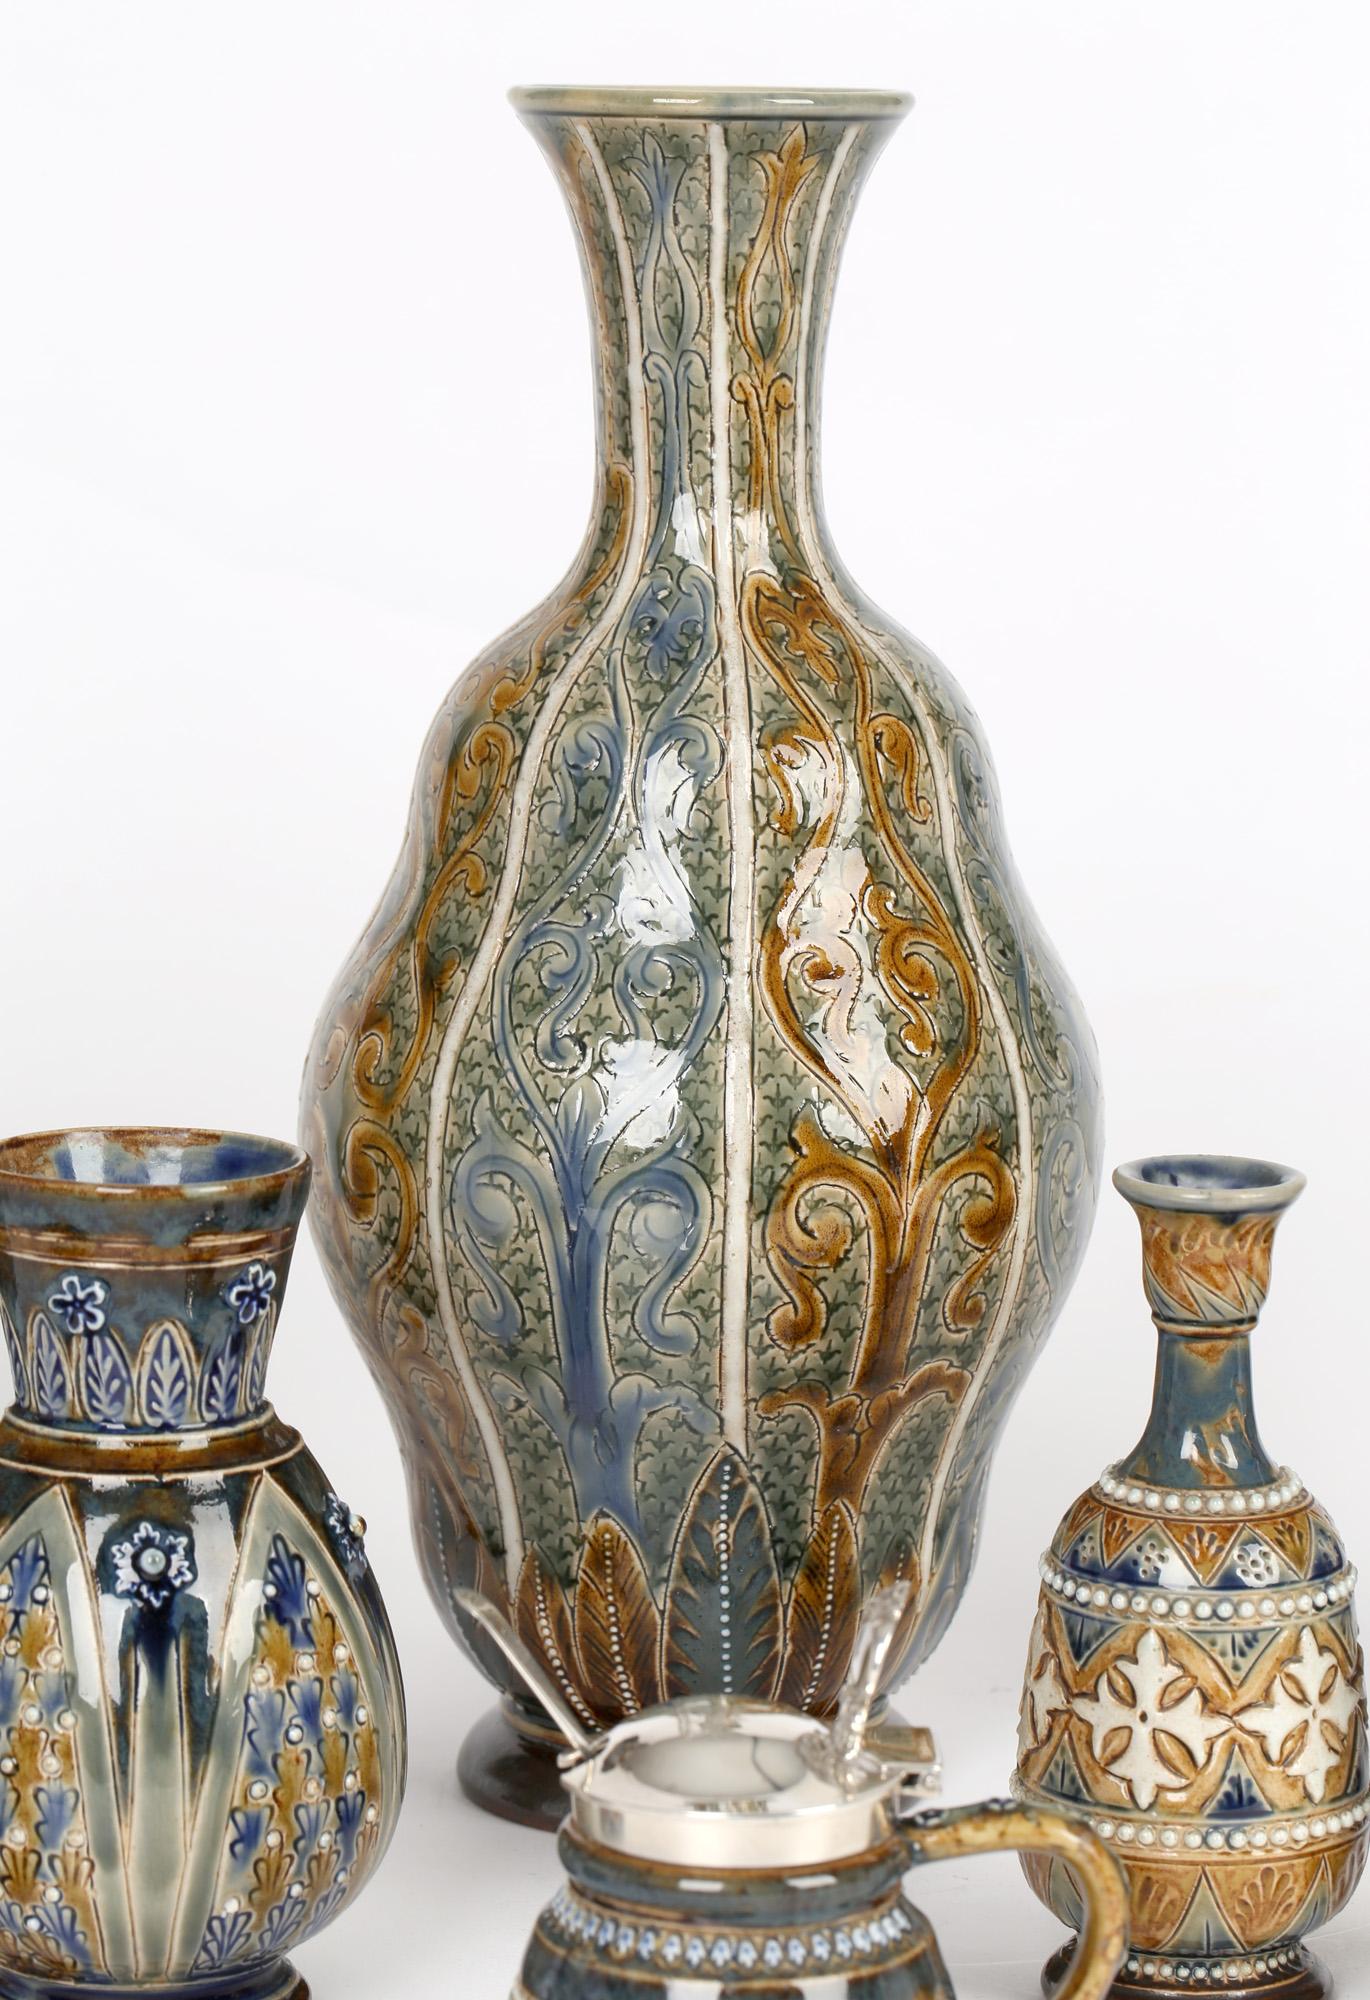 English Collection of 19th Century Art Pottery